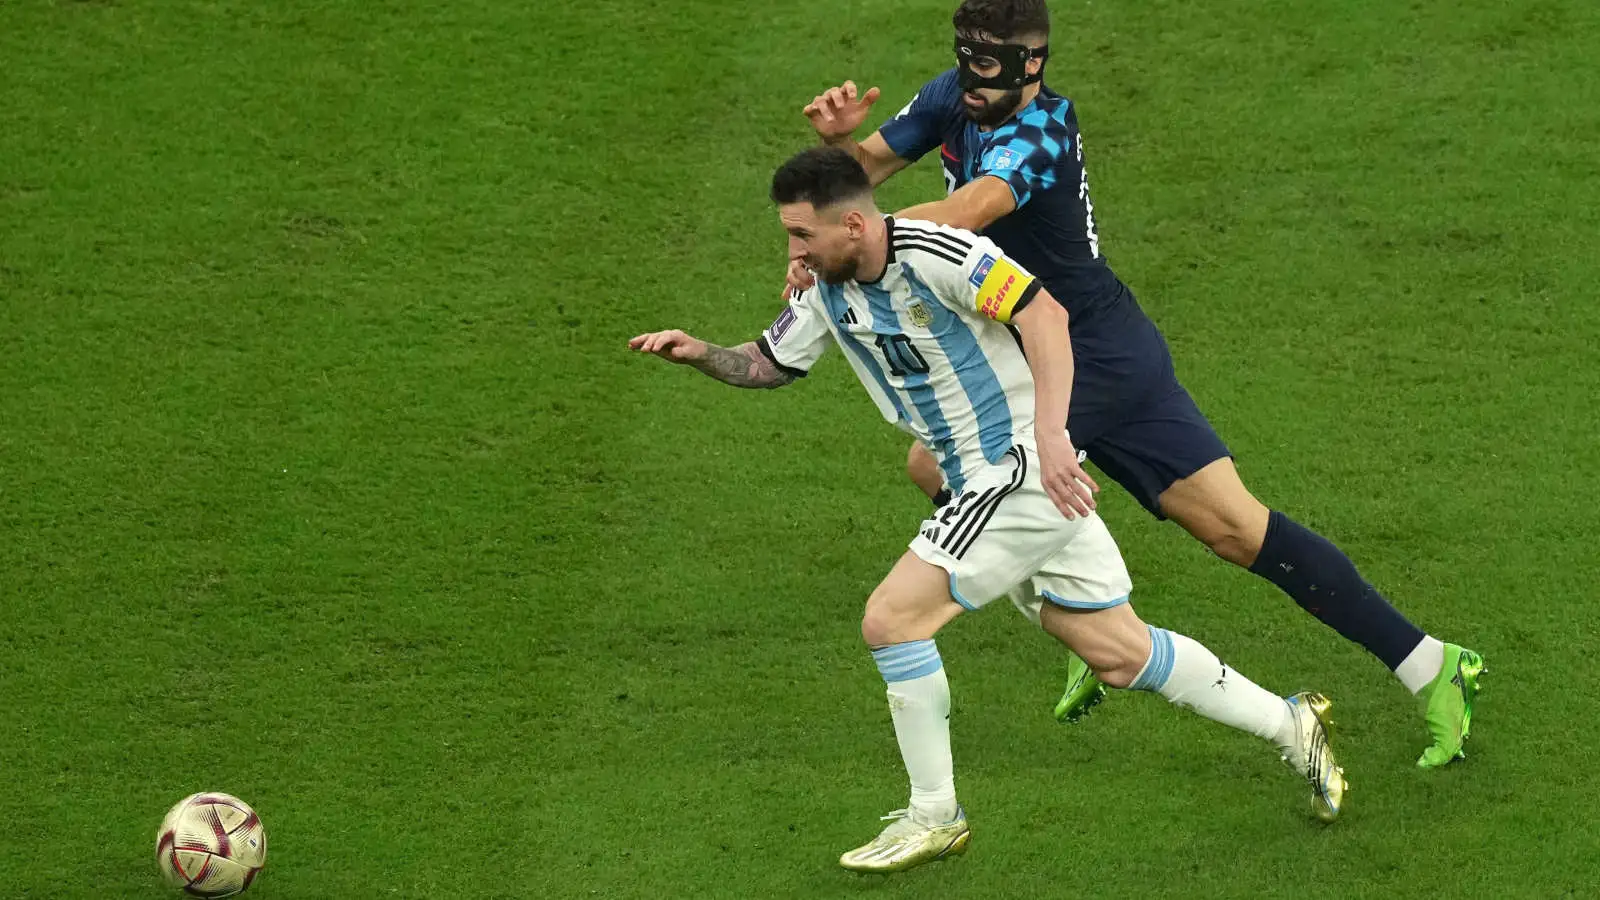 Lionel Messi or Argentina and Josko Gvardiol of Croatia during their 2022 World Cup semi-final